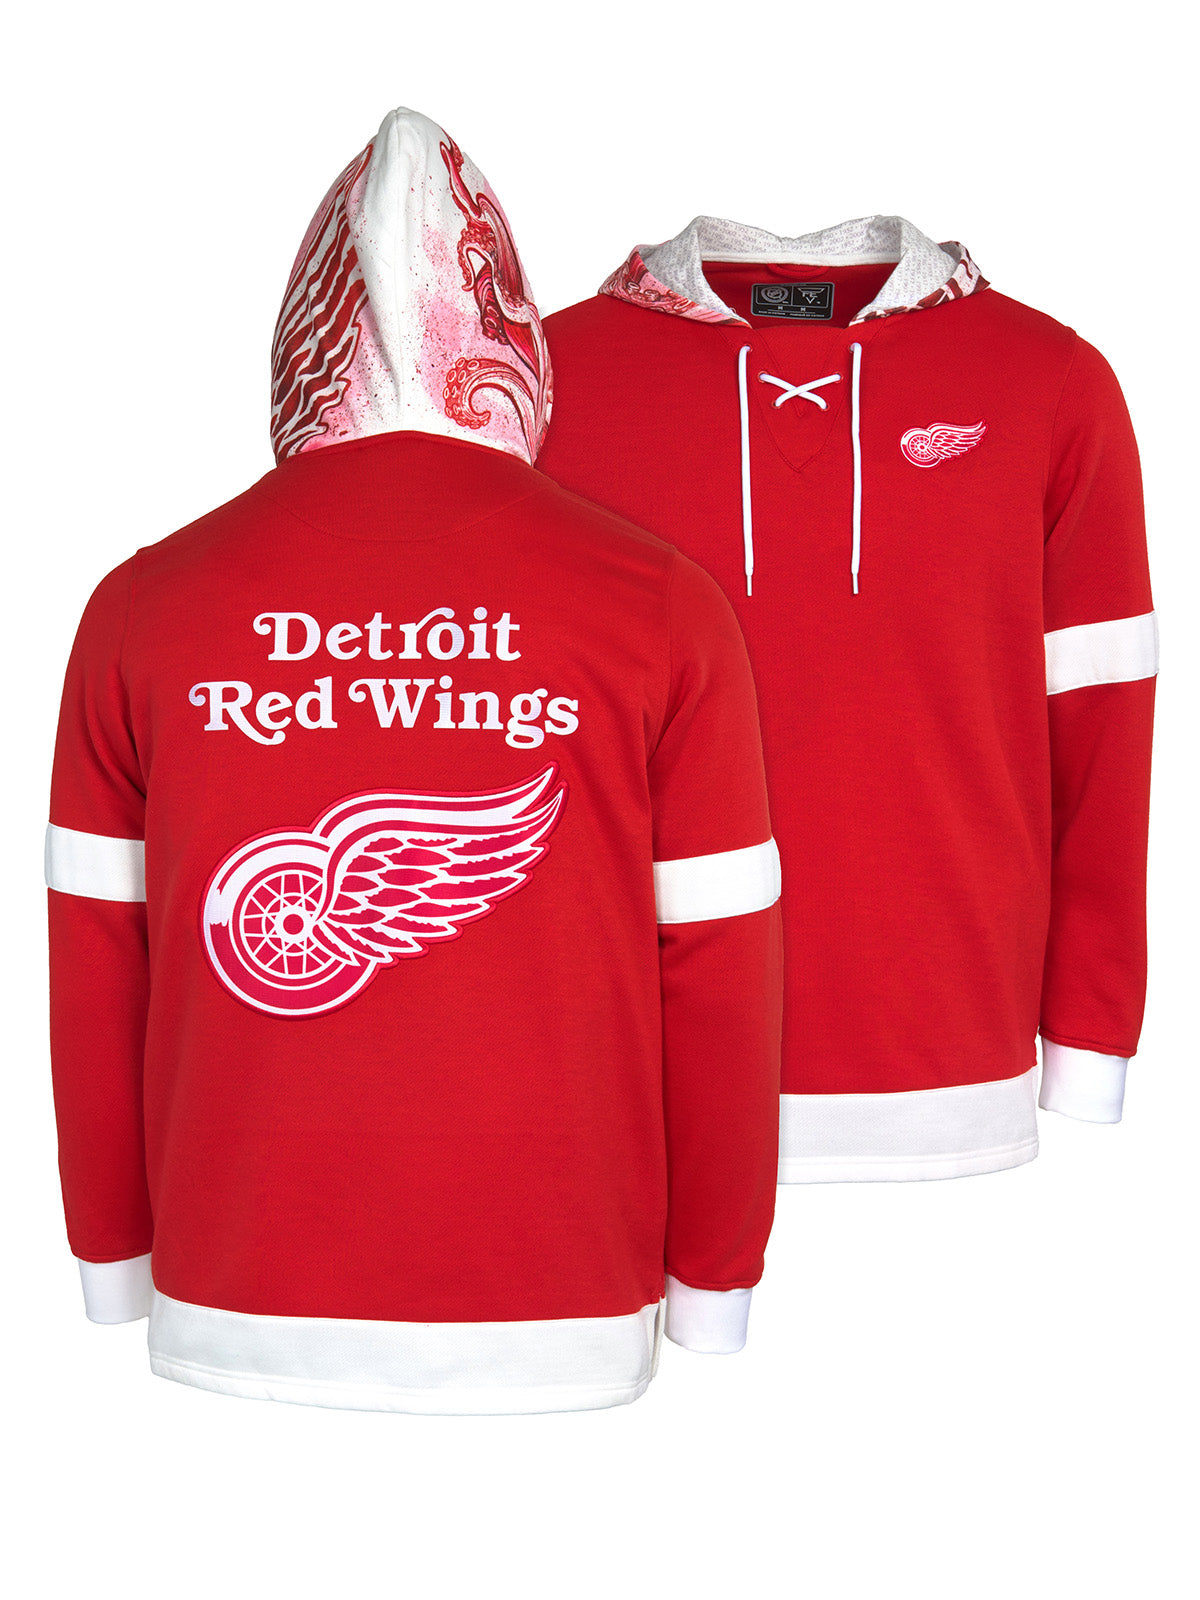 Detroit Red Wings Lace-Up Hoodie - Hand drawn custom hood designs with all the team colors and craftmanship to replicate the gameday jersey of this NHL hoodie